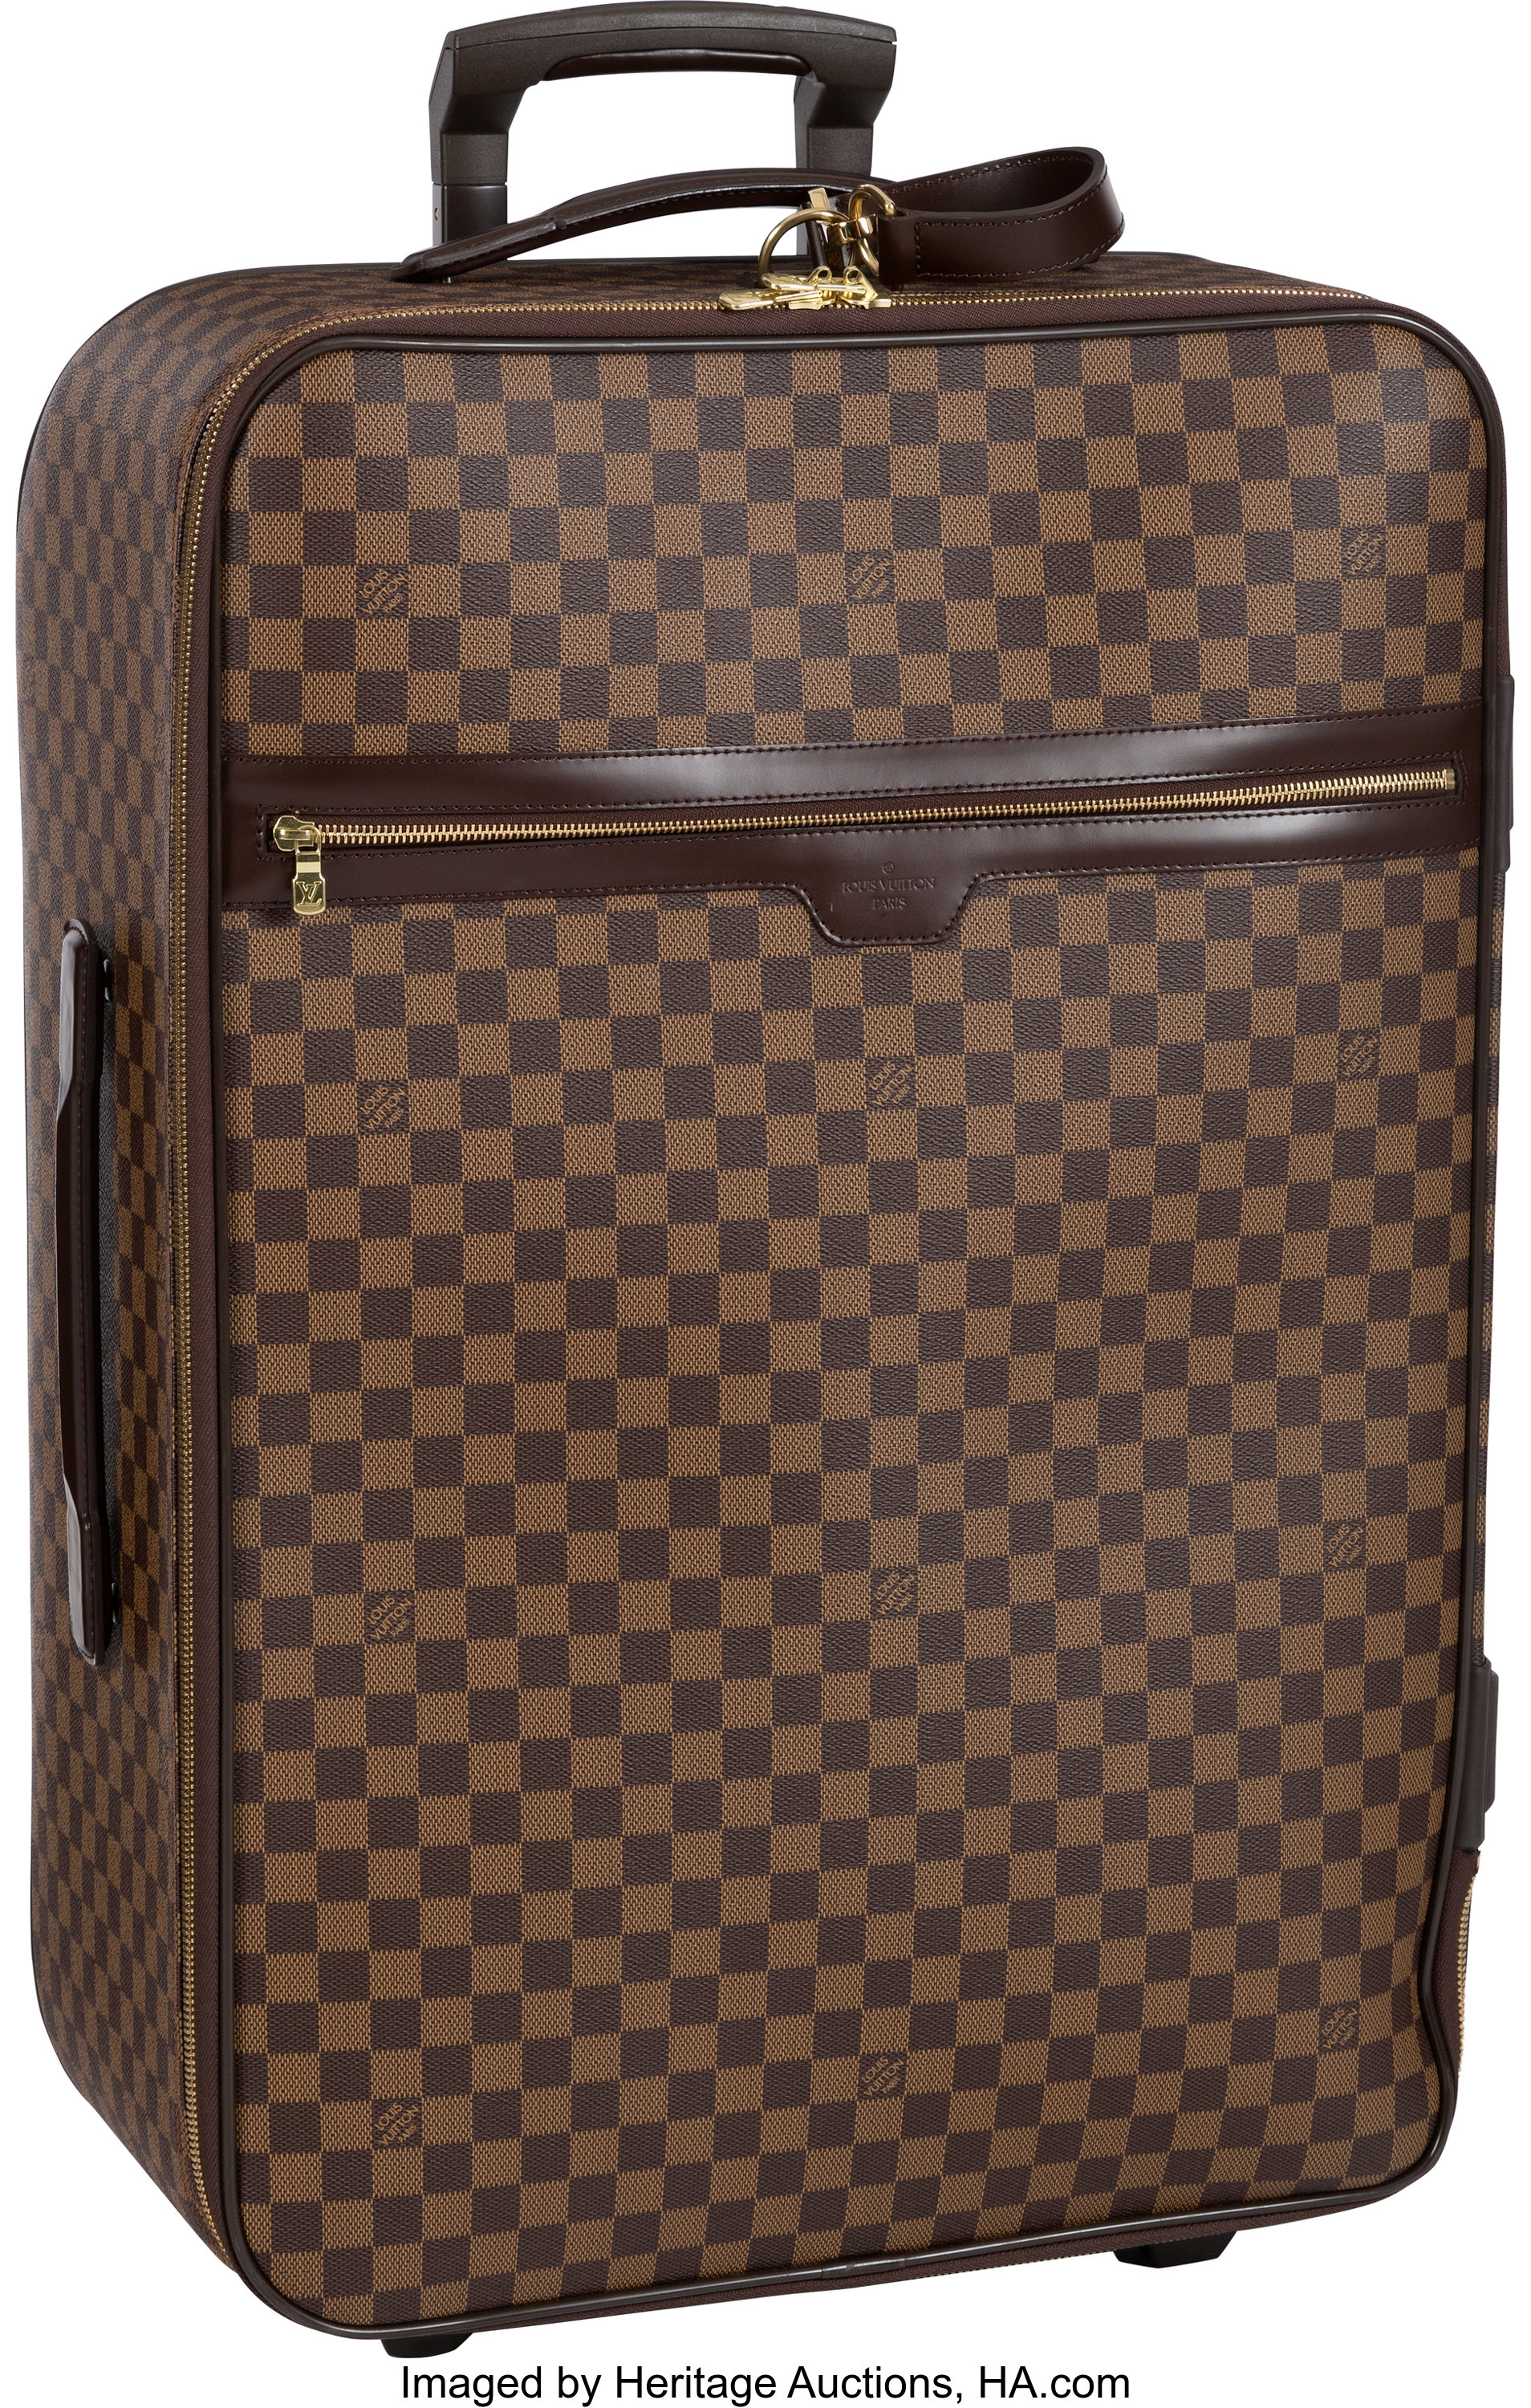 Rolling Trunk Monogram Macassar Canvas - Trunks and Travel